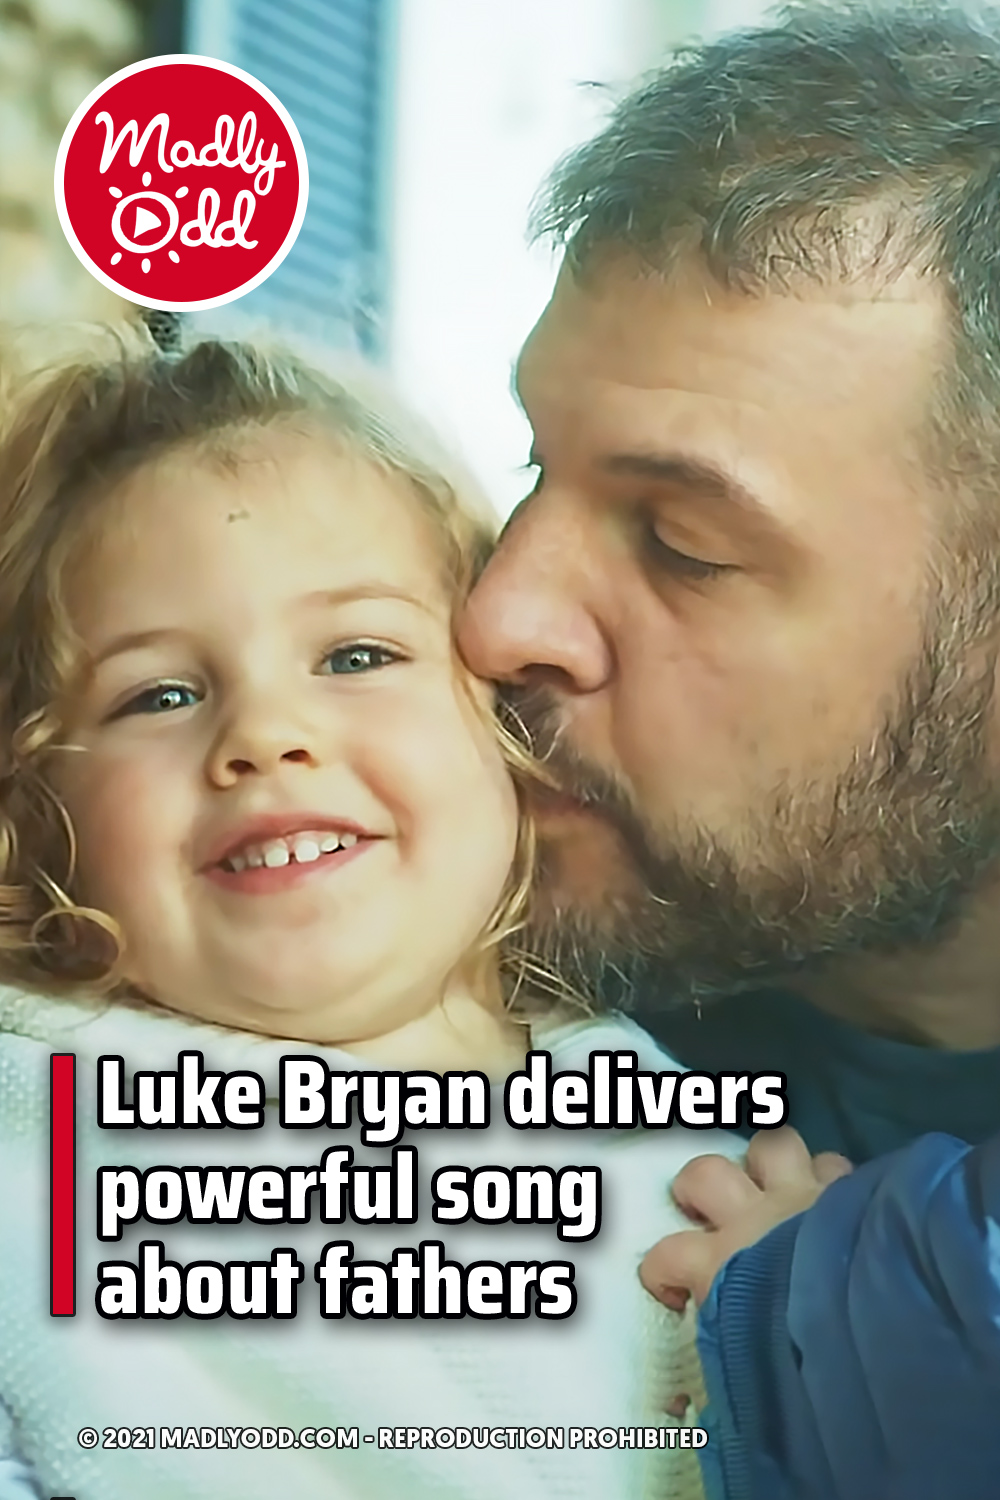 Luke Bryan delivers powerful song about fathers